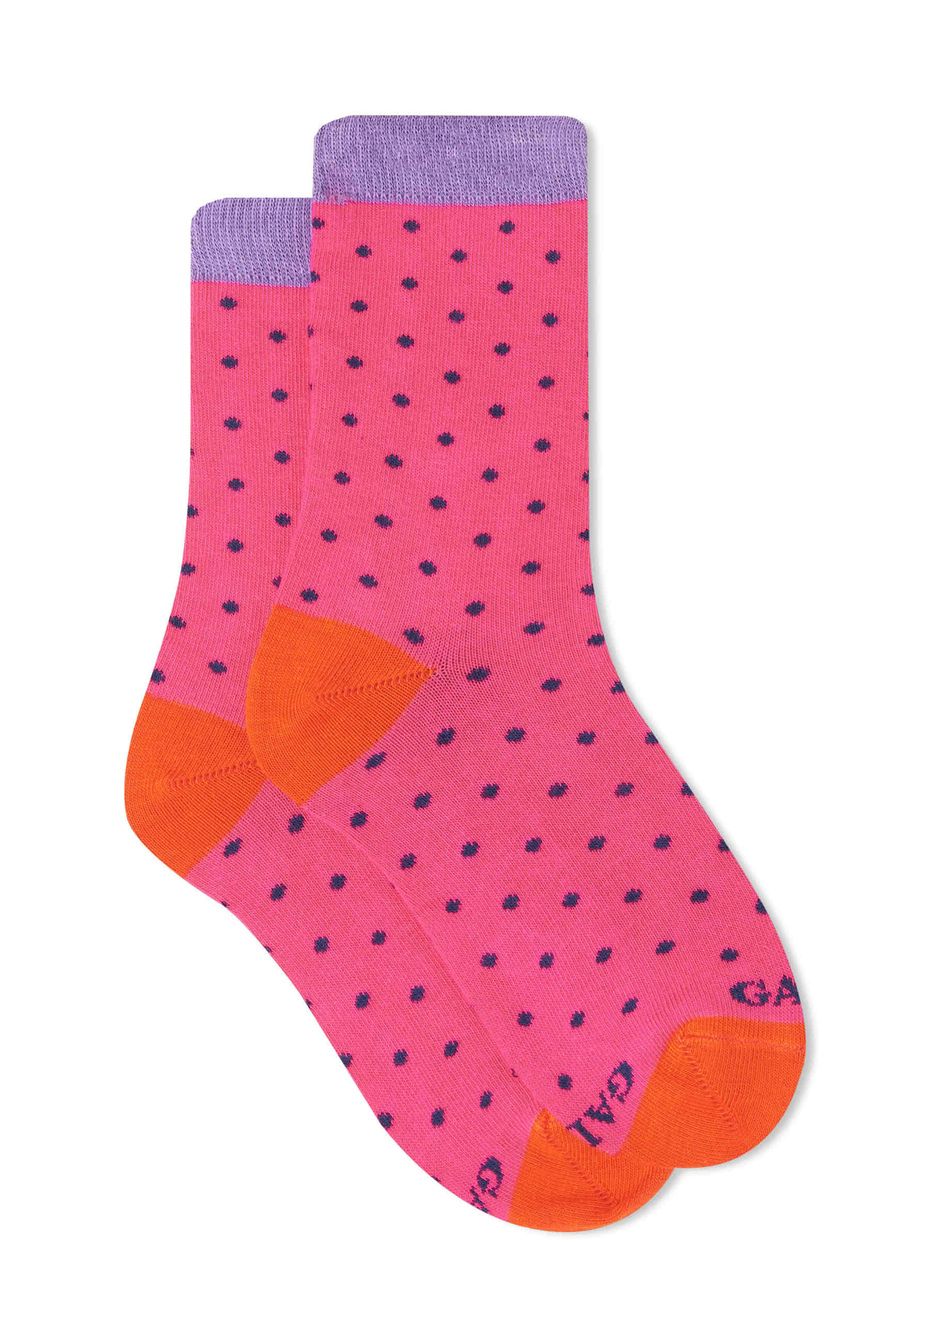 Kids' short hyacinth cotton socks with polka dots - Gallo 1927 - Official Online Shop